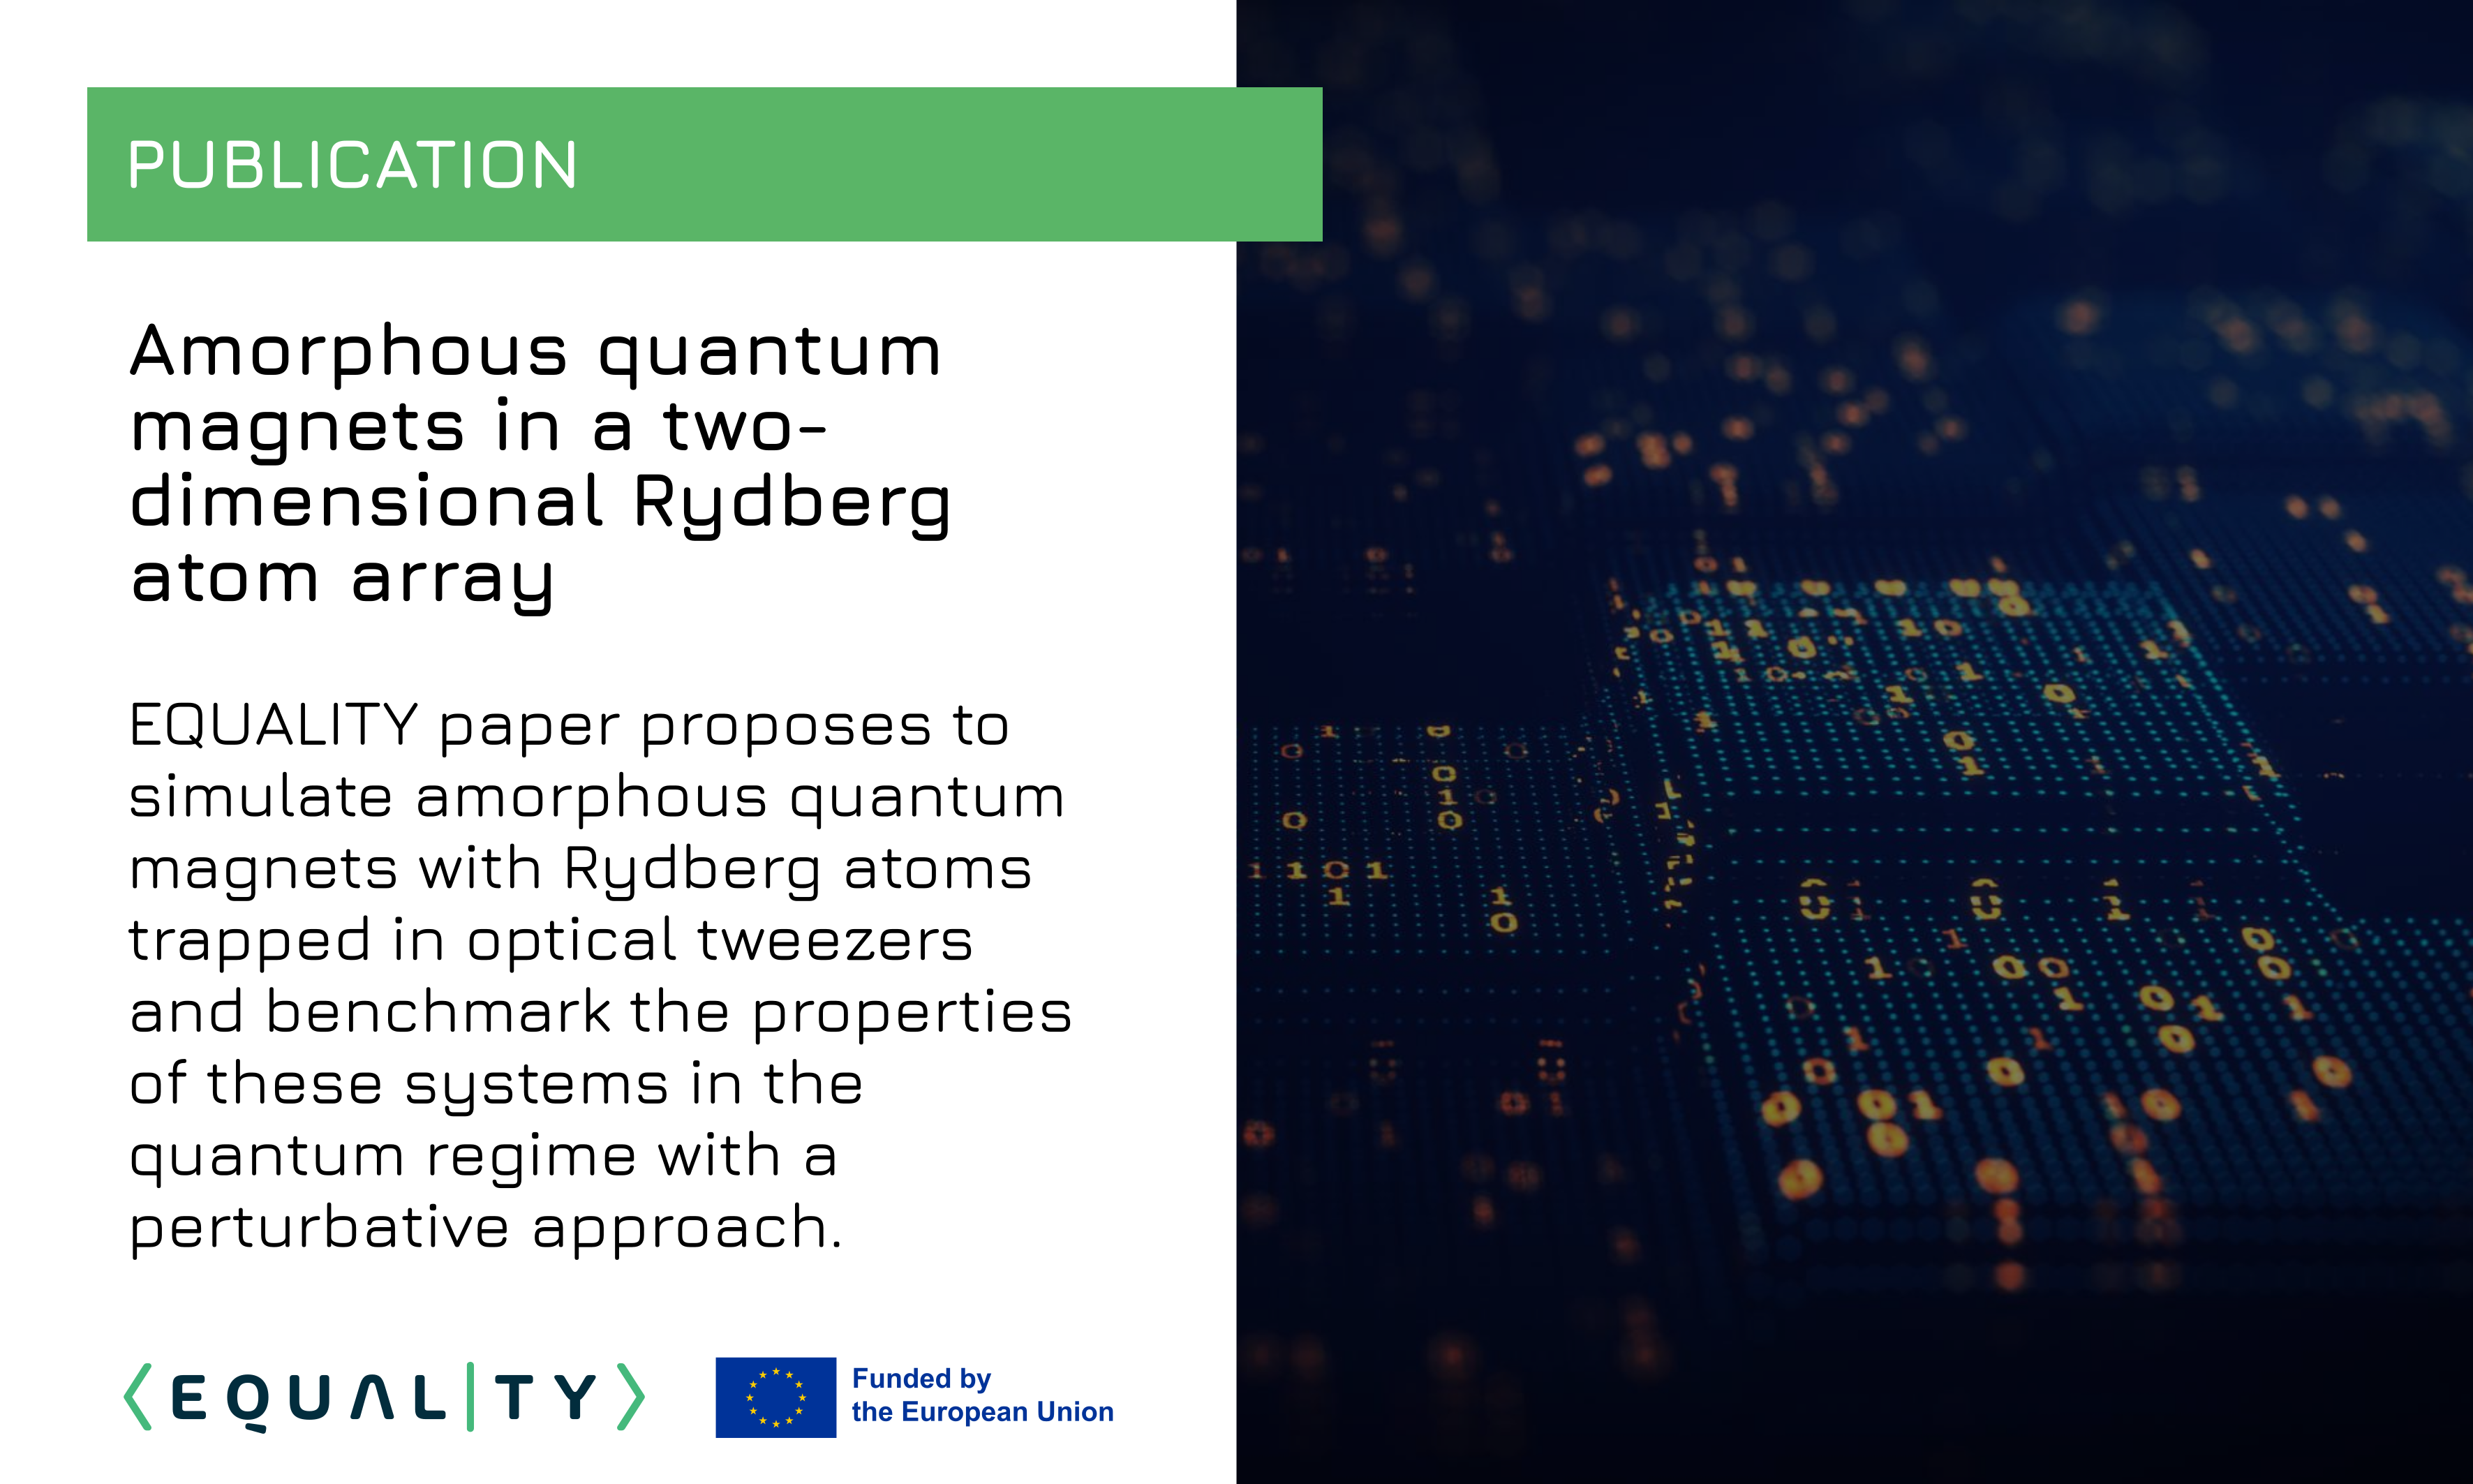 Publication: Amorphous quantum magnets in a two-dimensional Rydberg atom array 